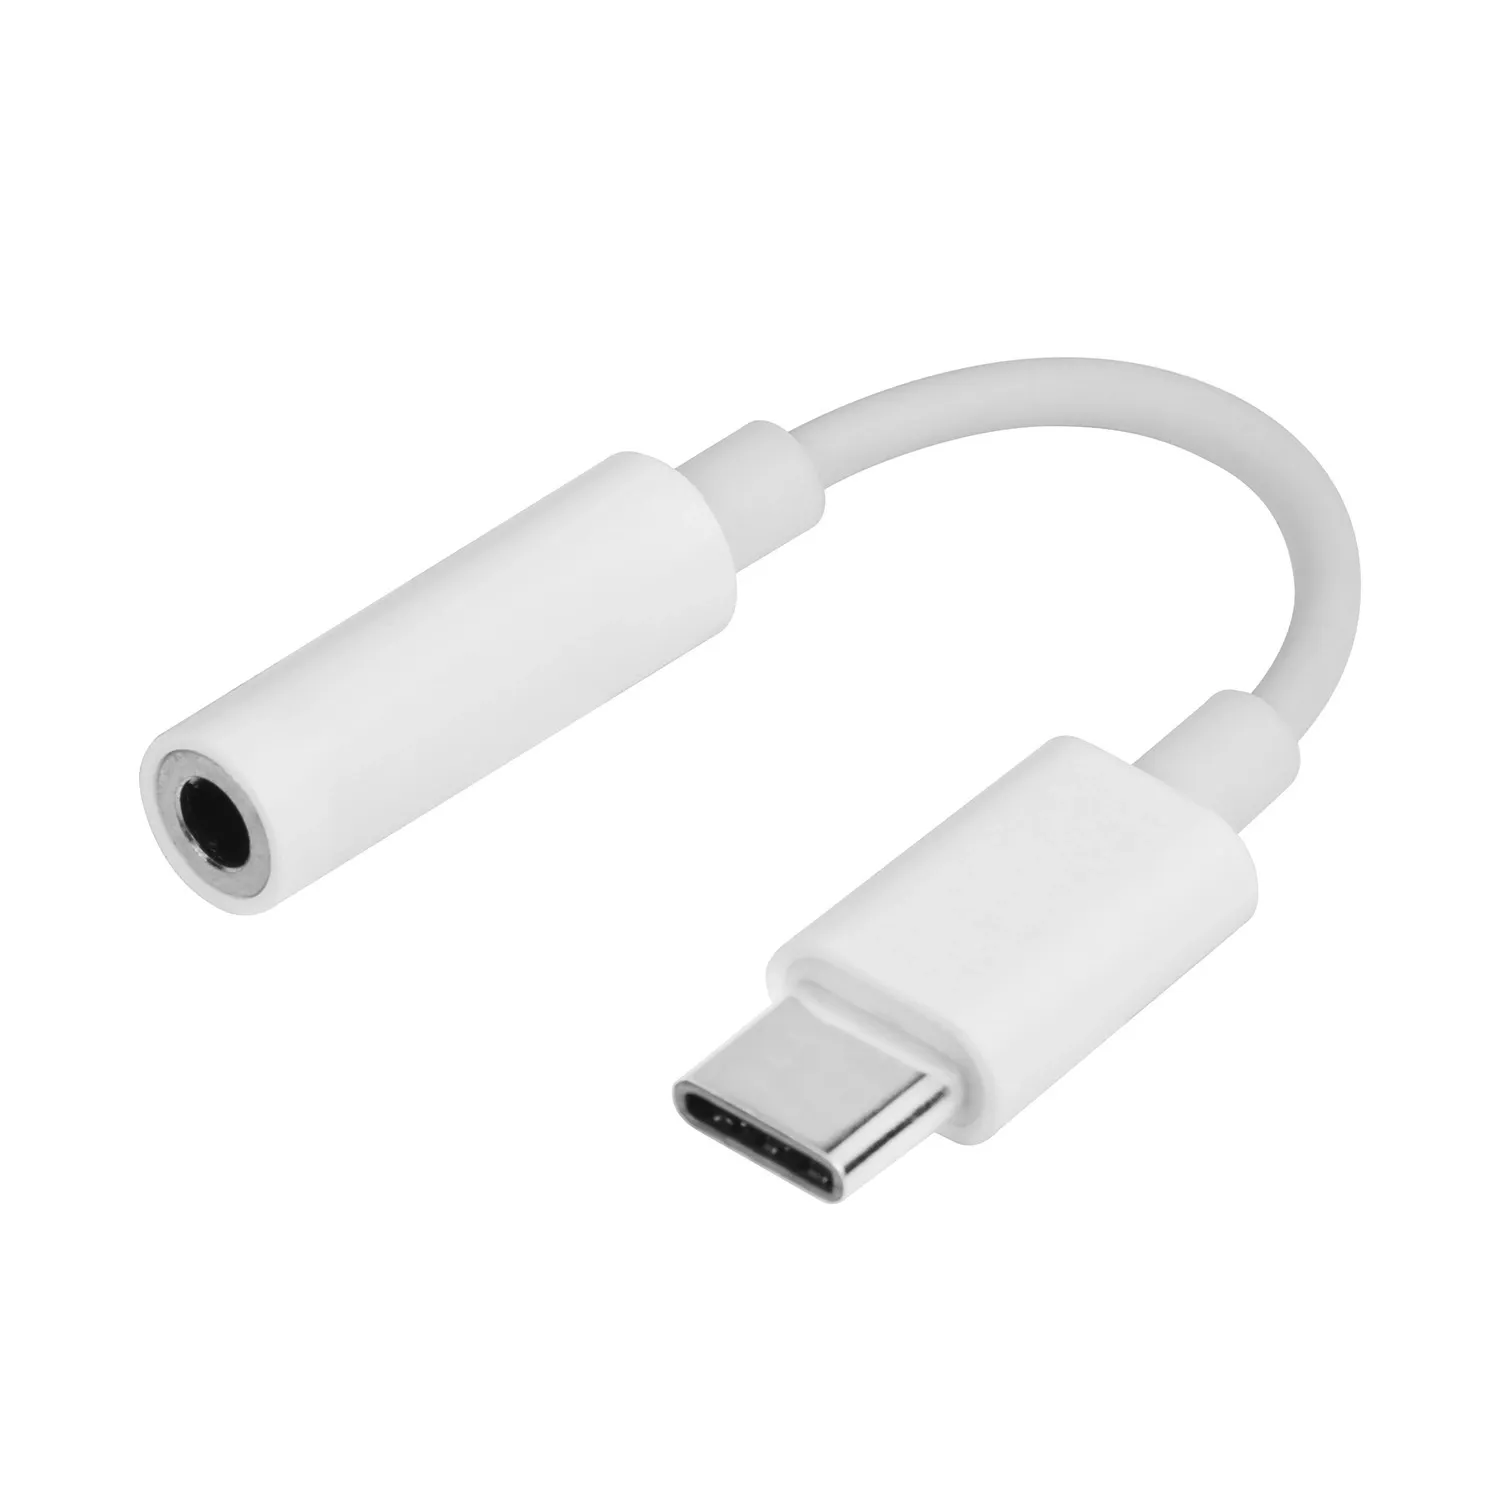 USB Type C to 3.5mm Adapter Cable Headphone Earphone Jack AUX Type-C Convertor Cabel